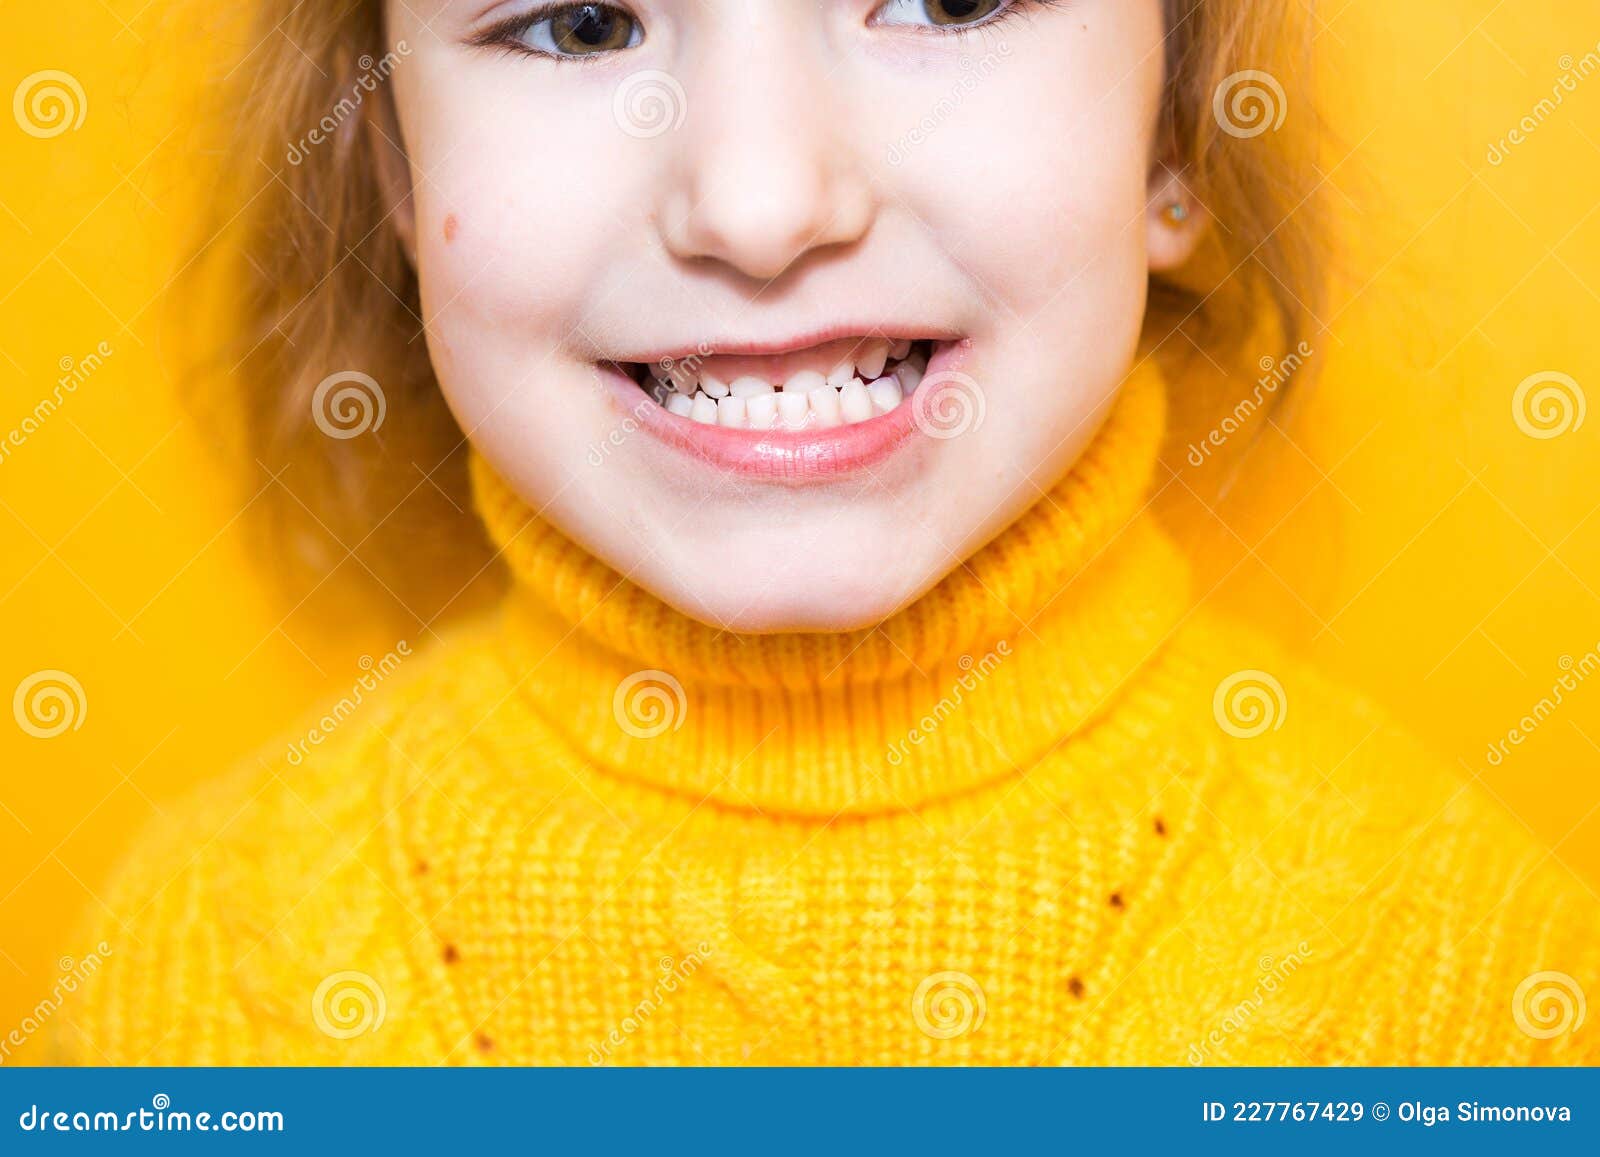 Girl Shows Her Teeth Pathological Bite Malocclusion Overbite 